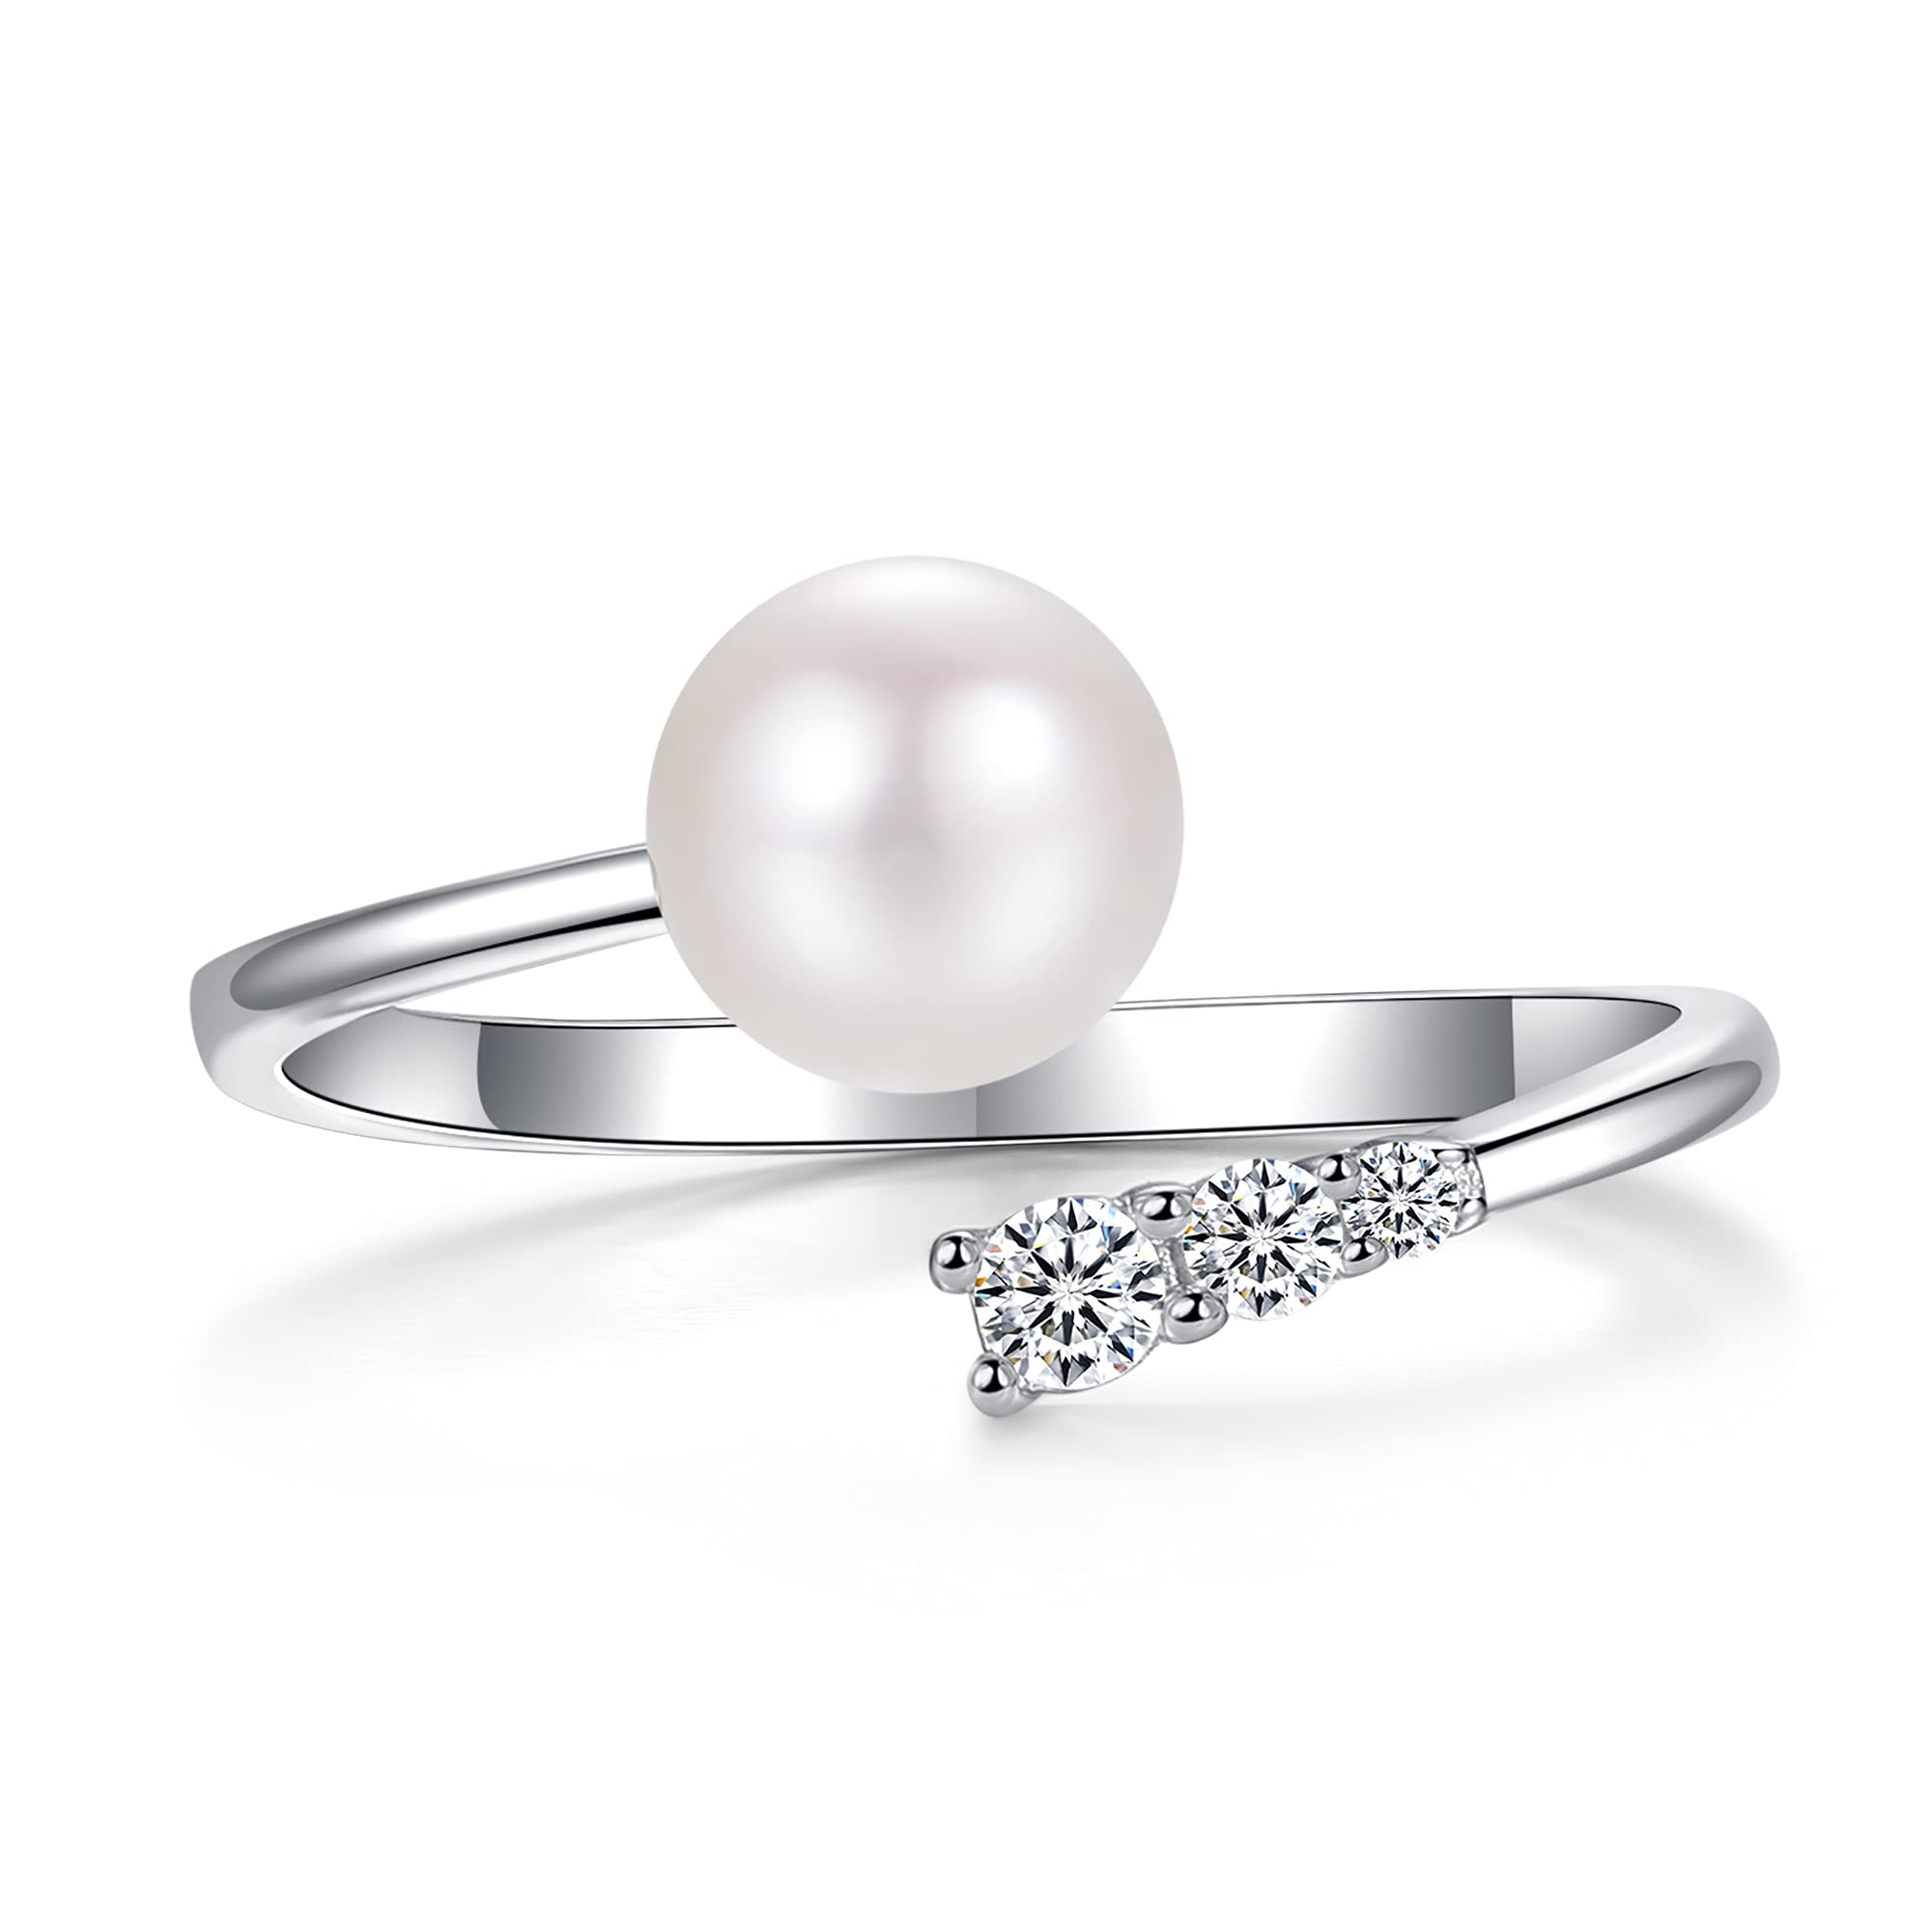 Buy JYX Pearl Ring Sterling Silver 9.5mm Pink Freshwater Pearl Rings for  Women at Amazon.in